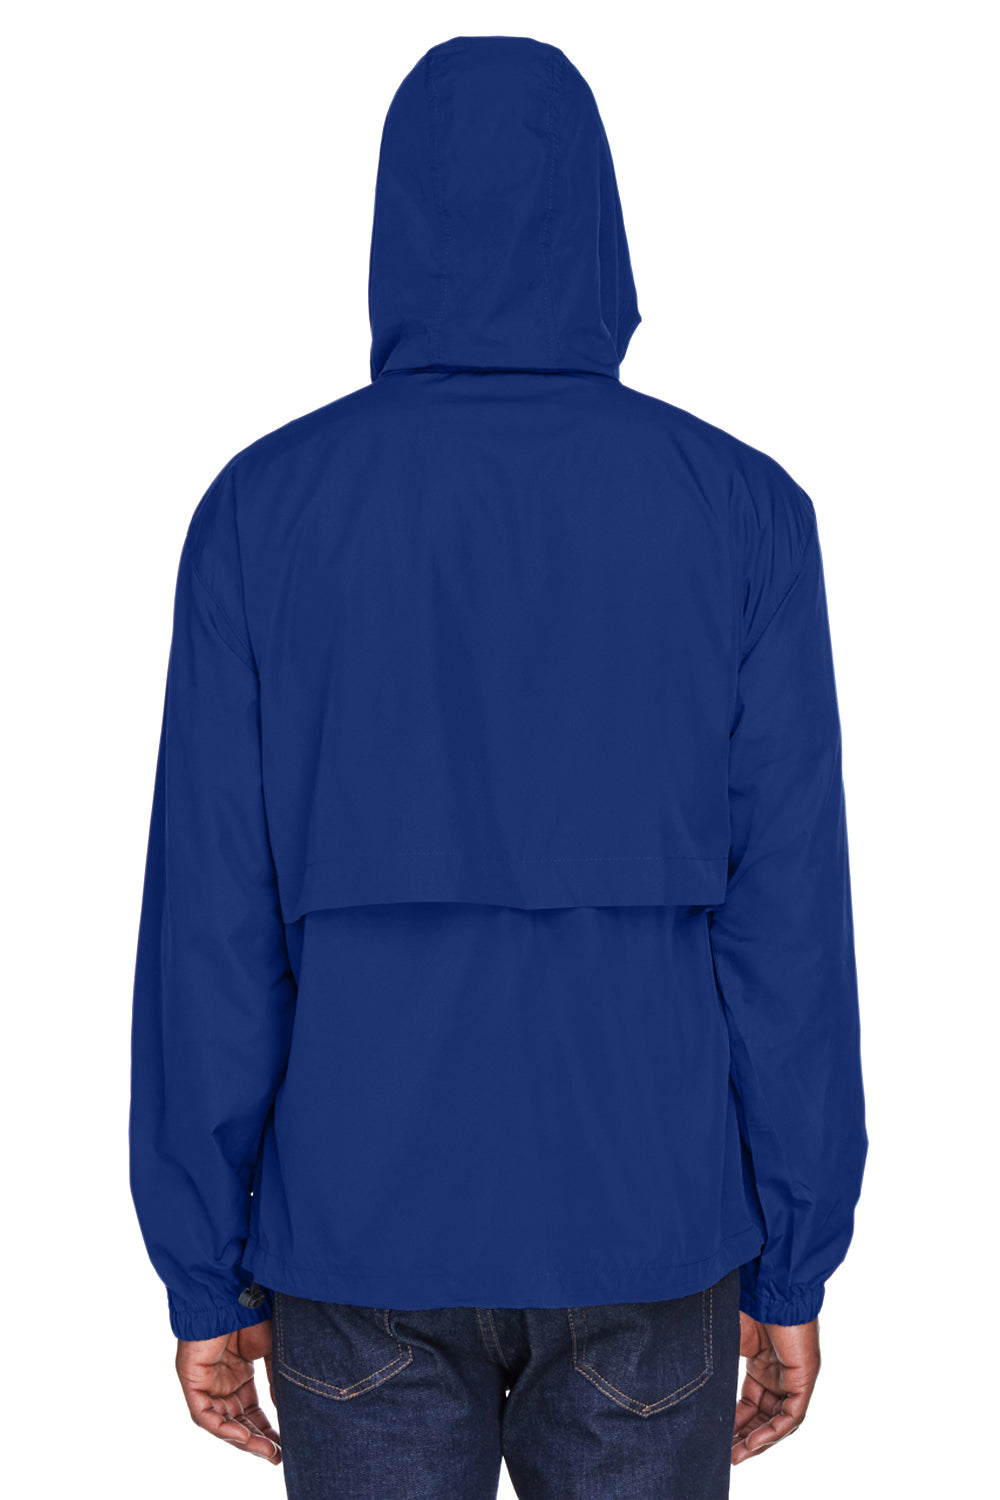 North End 88083 Mens Techno Lite Water Resistant Full Zip Hooded Jacket Royal Blue Back